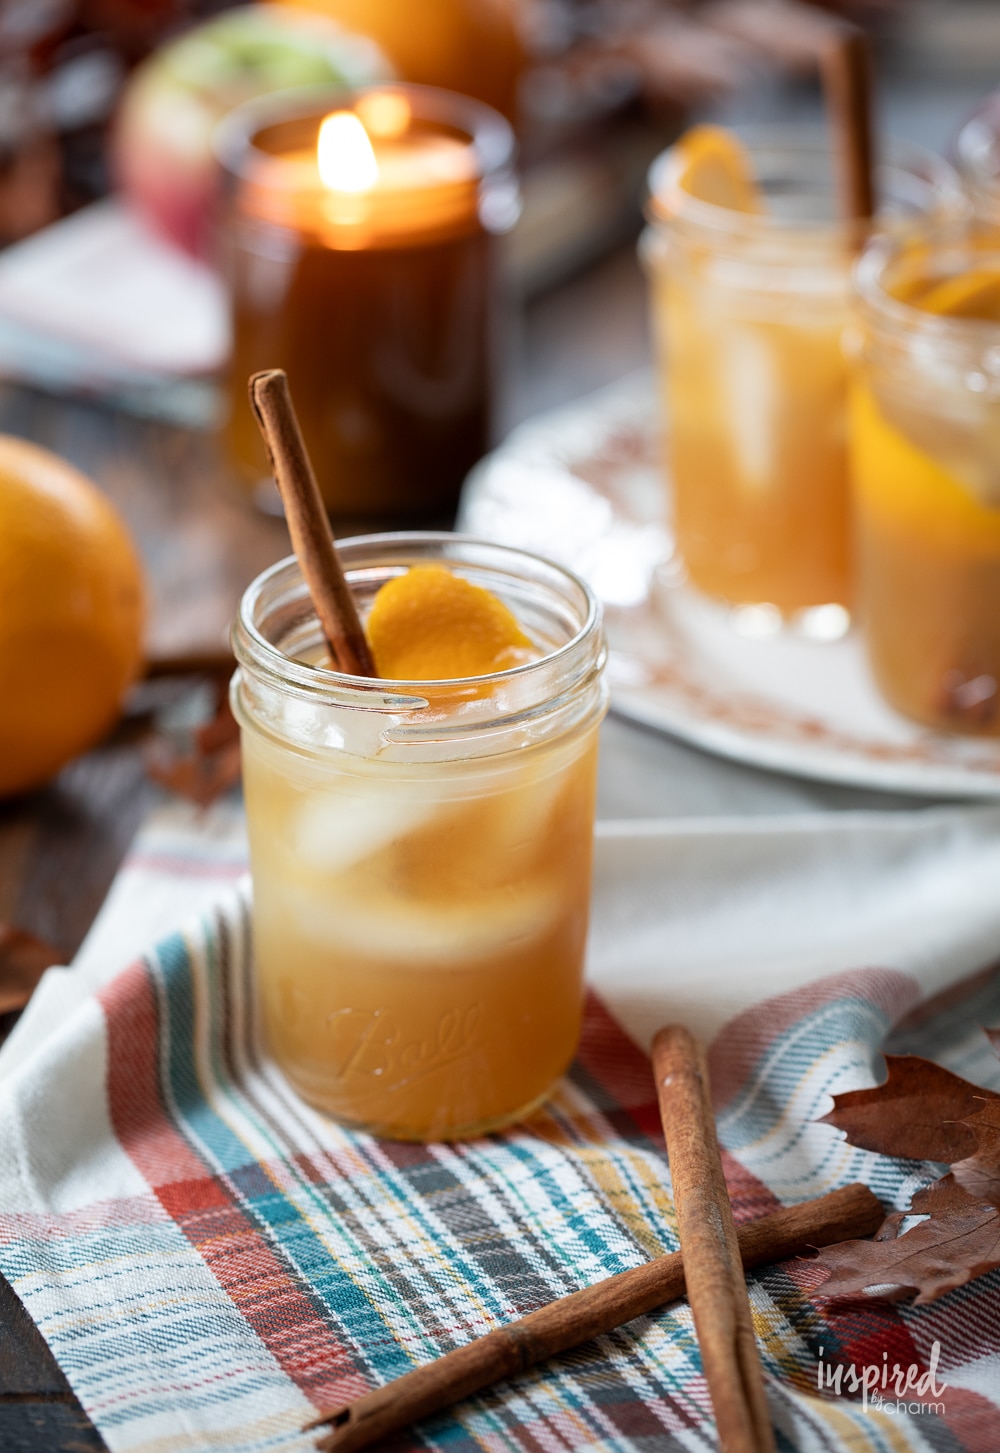 apple cider whiskey sour cocktail set in a cozy fall setting with a candle.